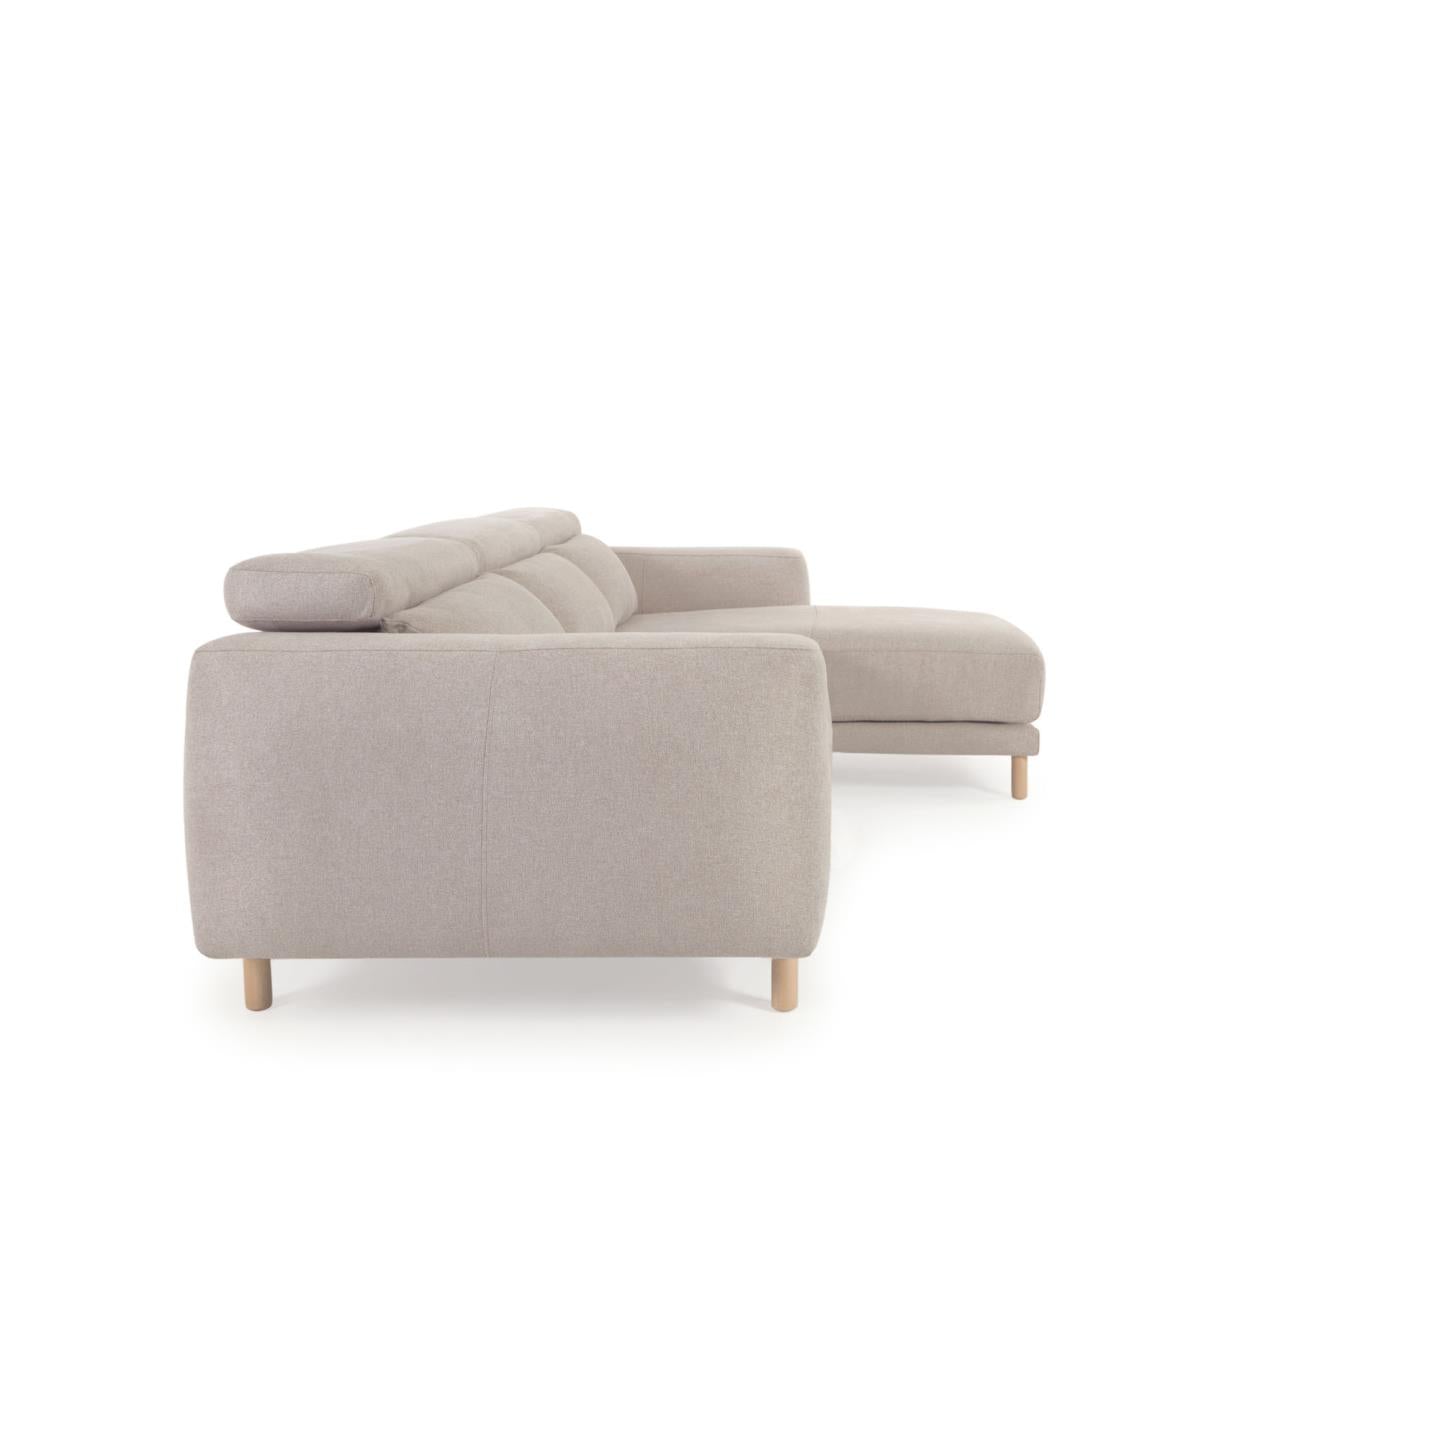 Singa 3 seater sofa with right-hand chaise longue in beige, 296 cm